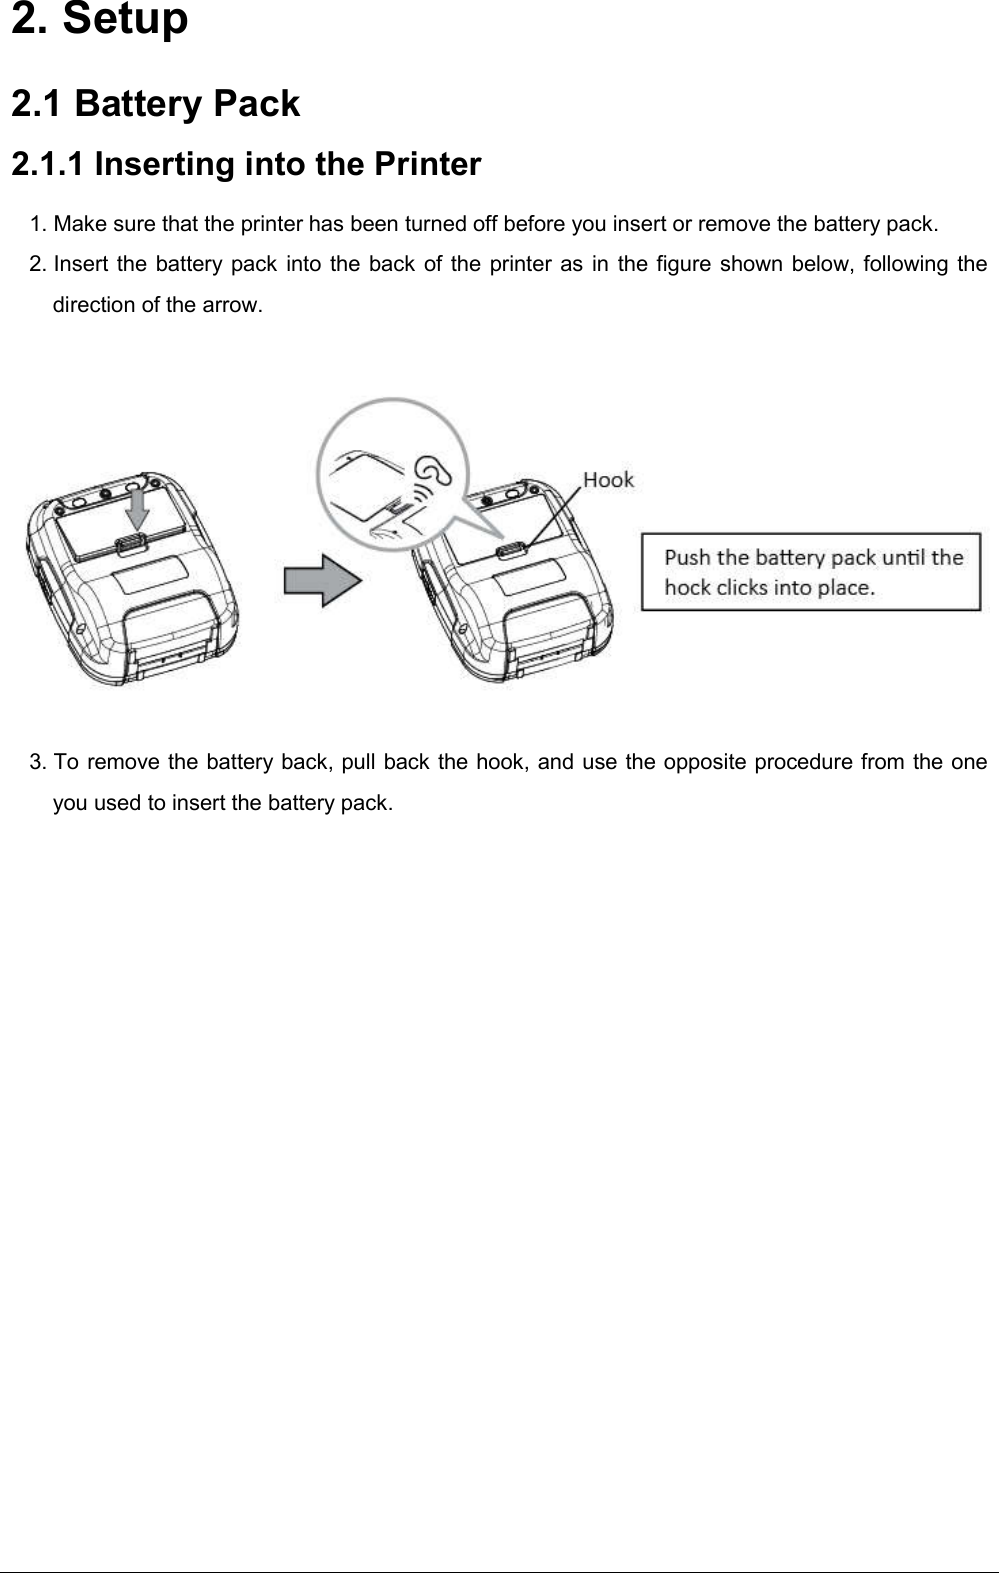    2. Setup 2.1 Battery Pack 2.1.1 Inserting into the Printer 1. Make sure that the printer has been turned off before you insert or remove the battery pack. 2. Insert the battery pack into the back of the printer as in the figure shown below, following the direction of the arrow.       3. To remove the battery back, pull back the hook, and use the opposite procedure from the one you used to insert the battery pack. 